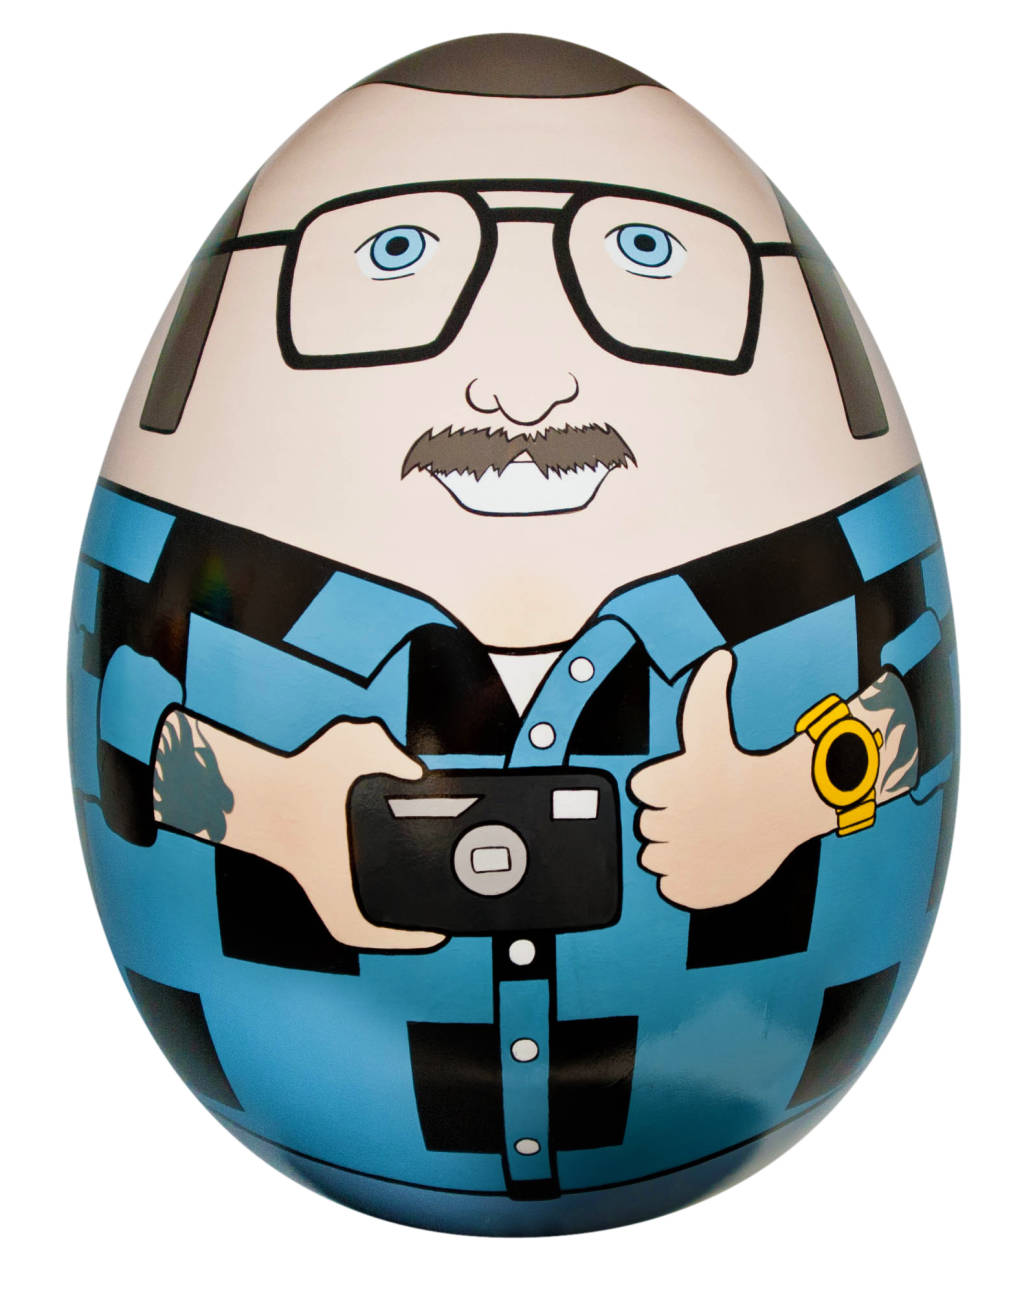 This “egg man” was created for the New York City Big Egg Hunt by Terry Richardson. Photo: Fabergé.